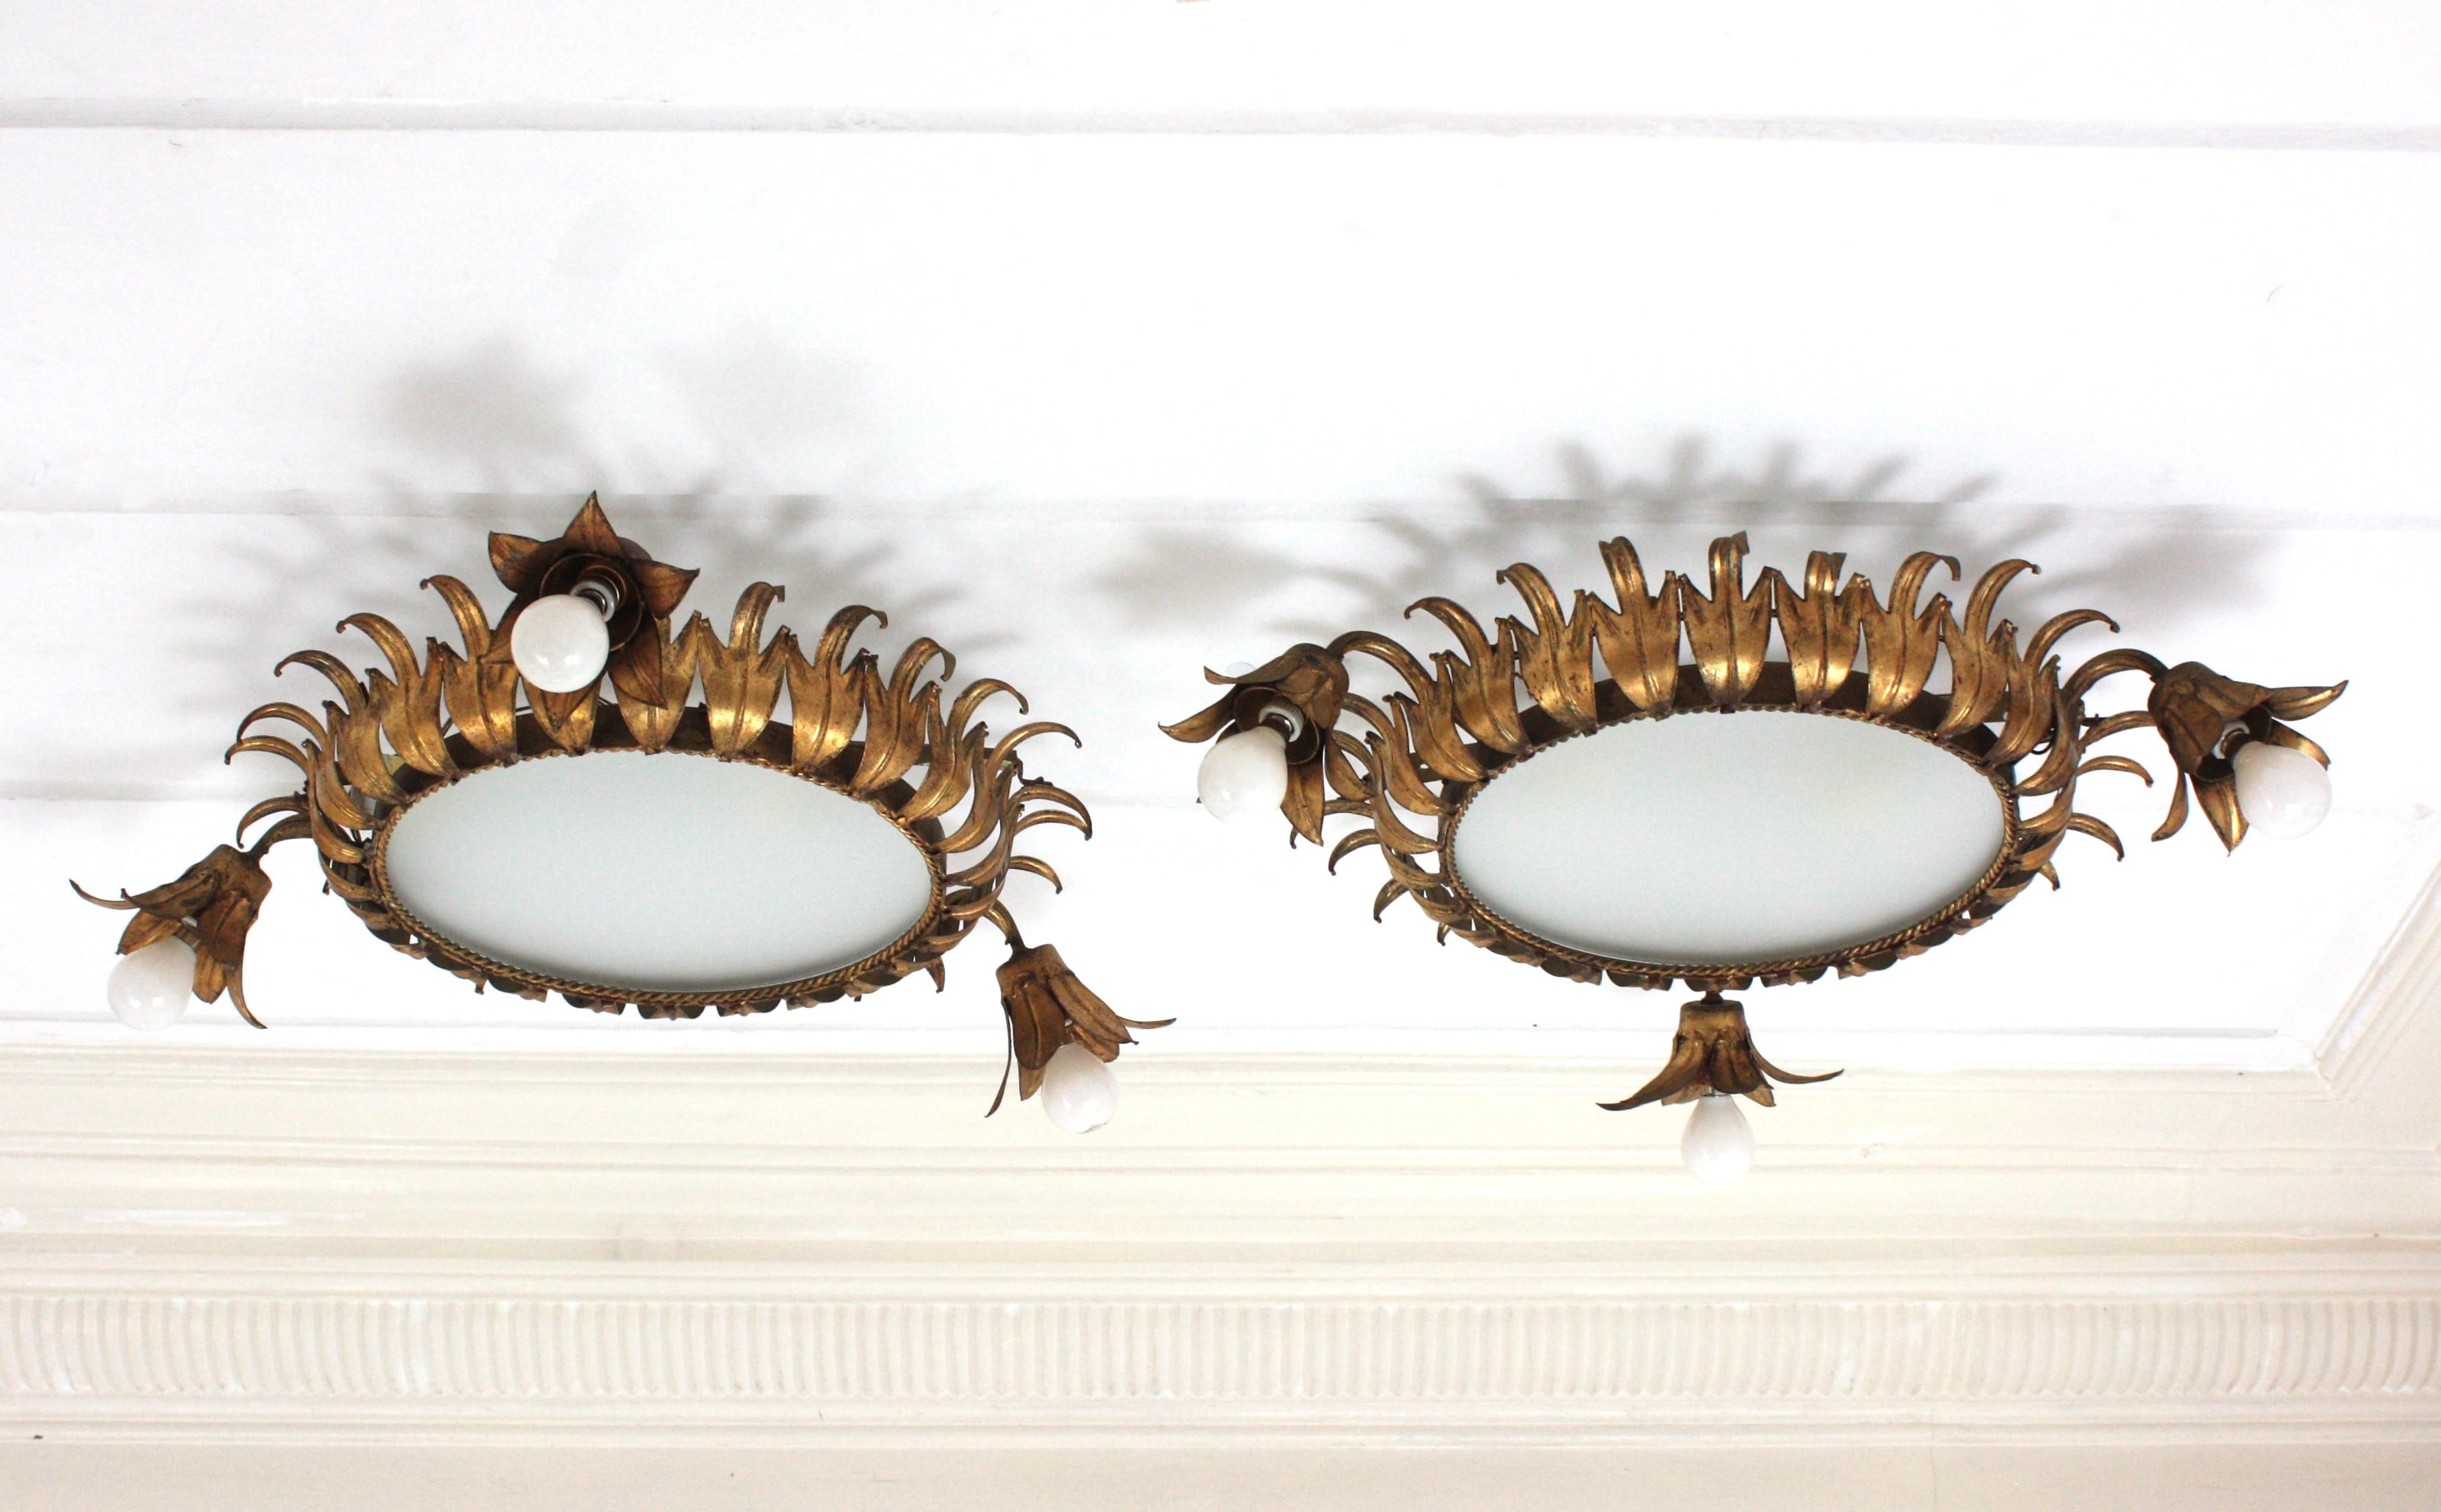 Unique Pair of Sunburst Crown Foliage Flush Mounts with three flowers, Gilt Iron. Spain, 1950s
These handcrafted crown sunburst ceiling lamps feature a crown shaped flush mount with frosted glass difusser. The sunburst crown light body is surrounded